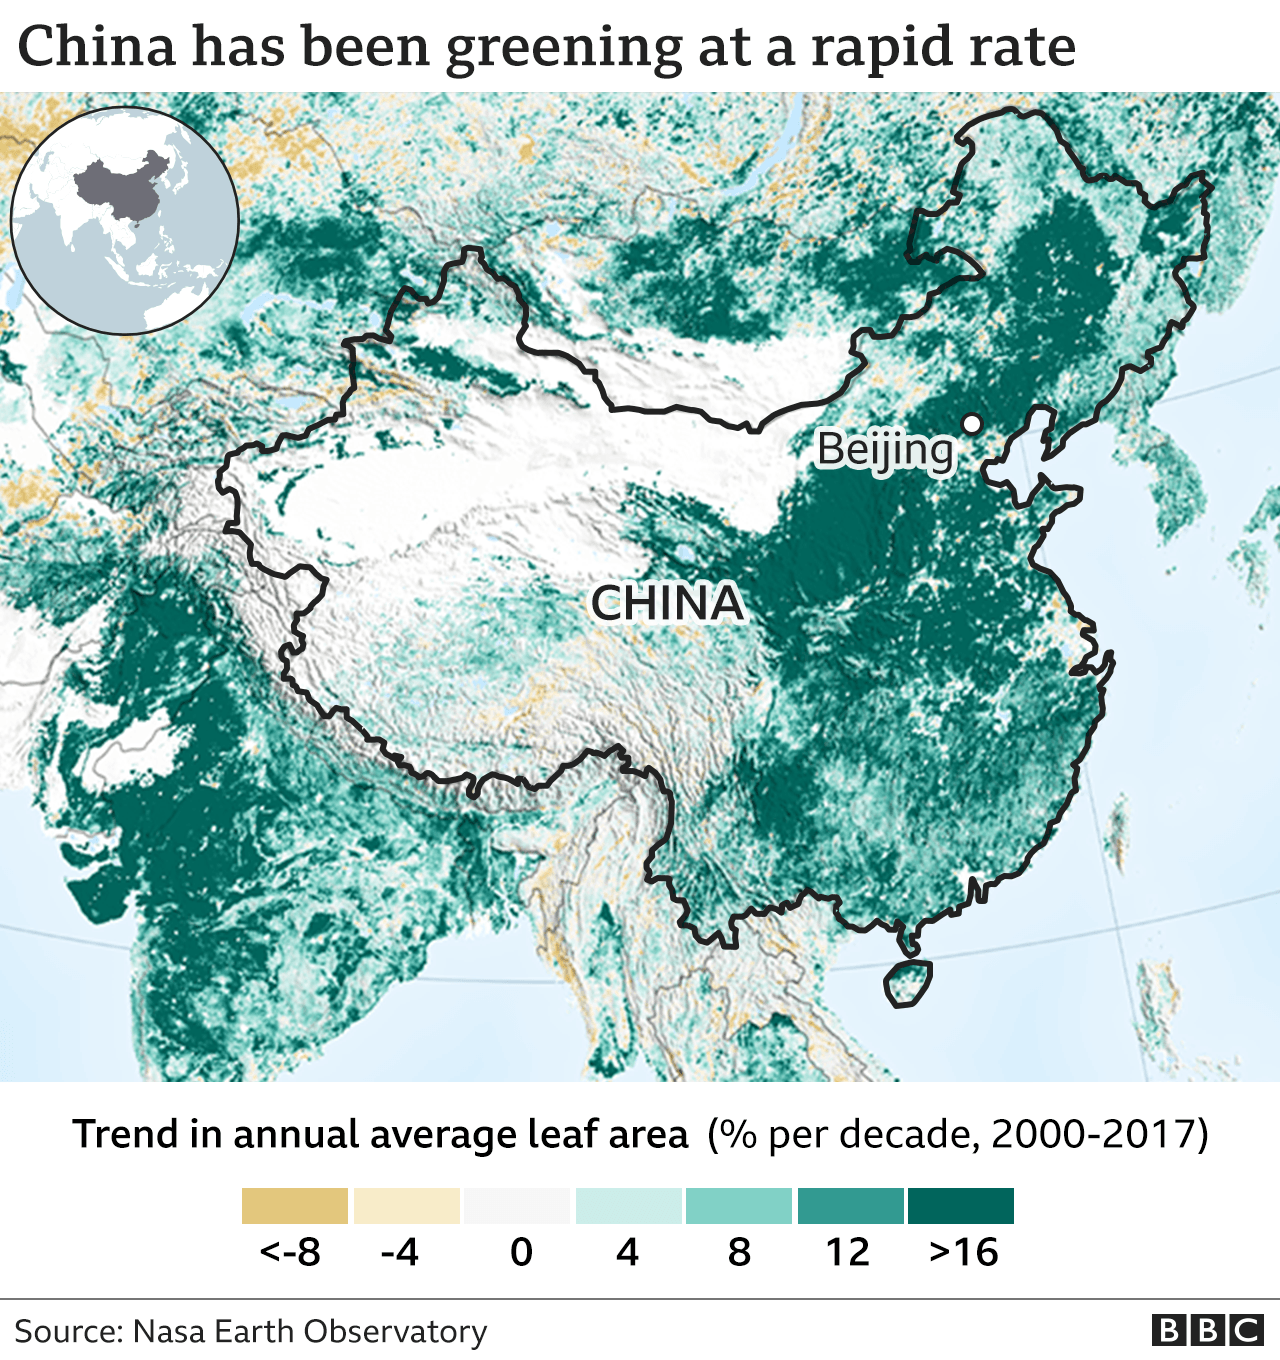 Map showing China's greening at a rapid pace.